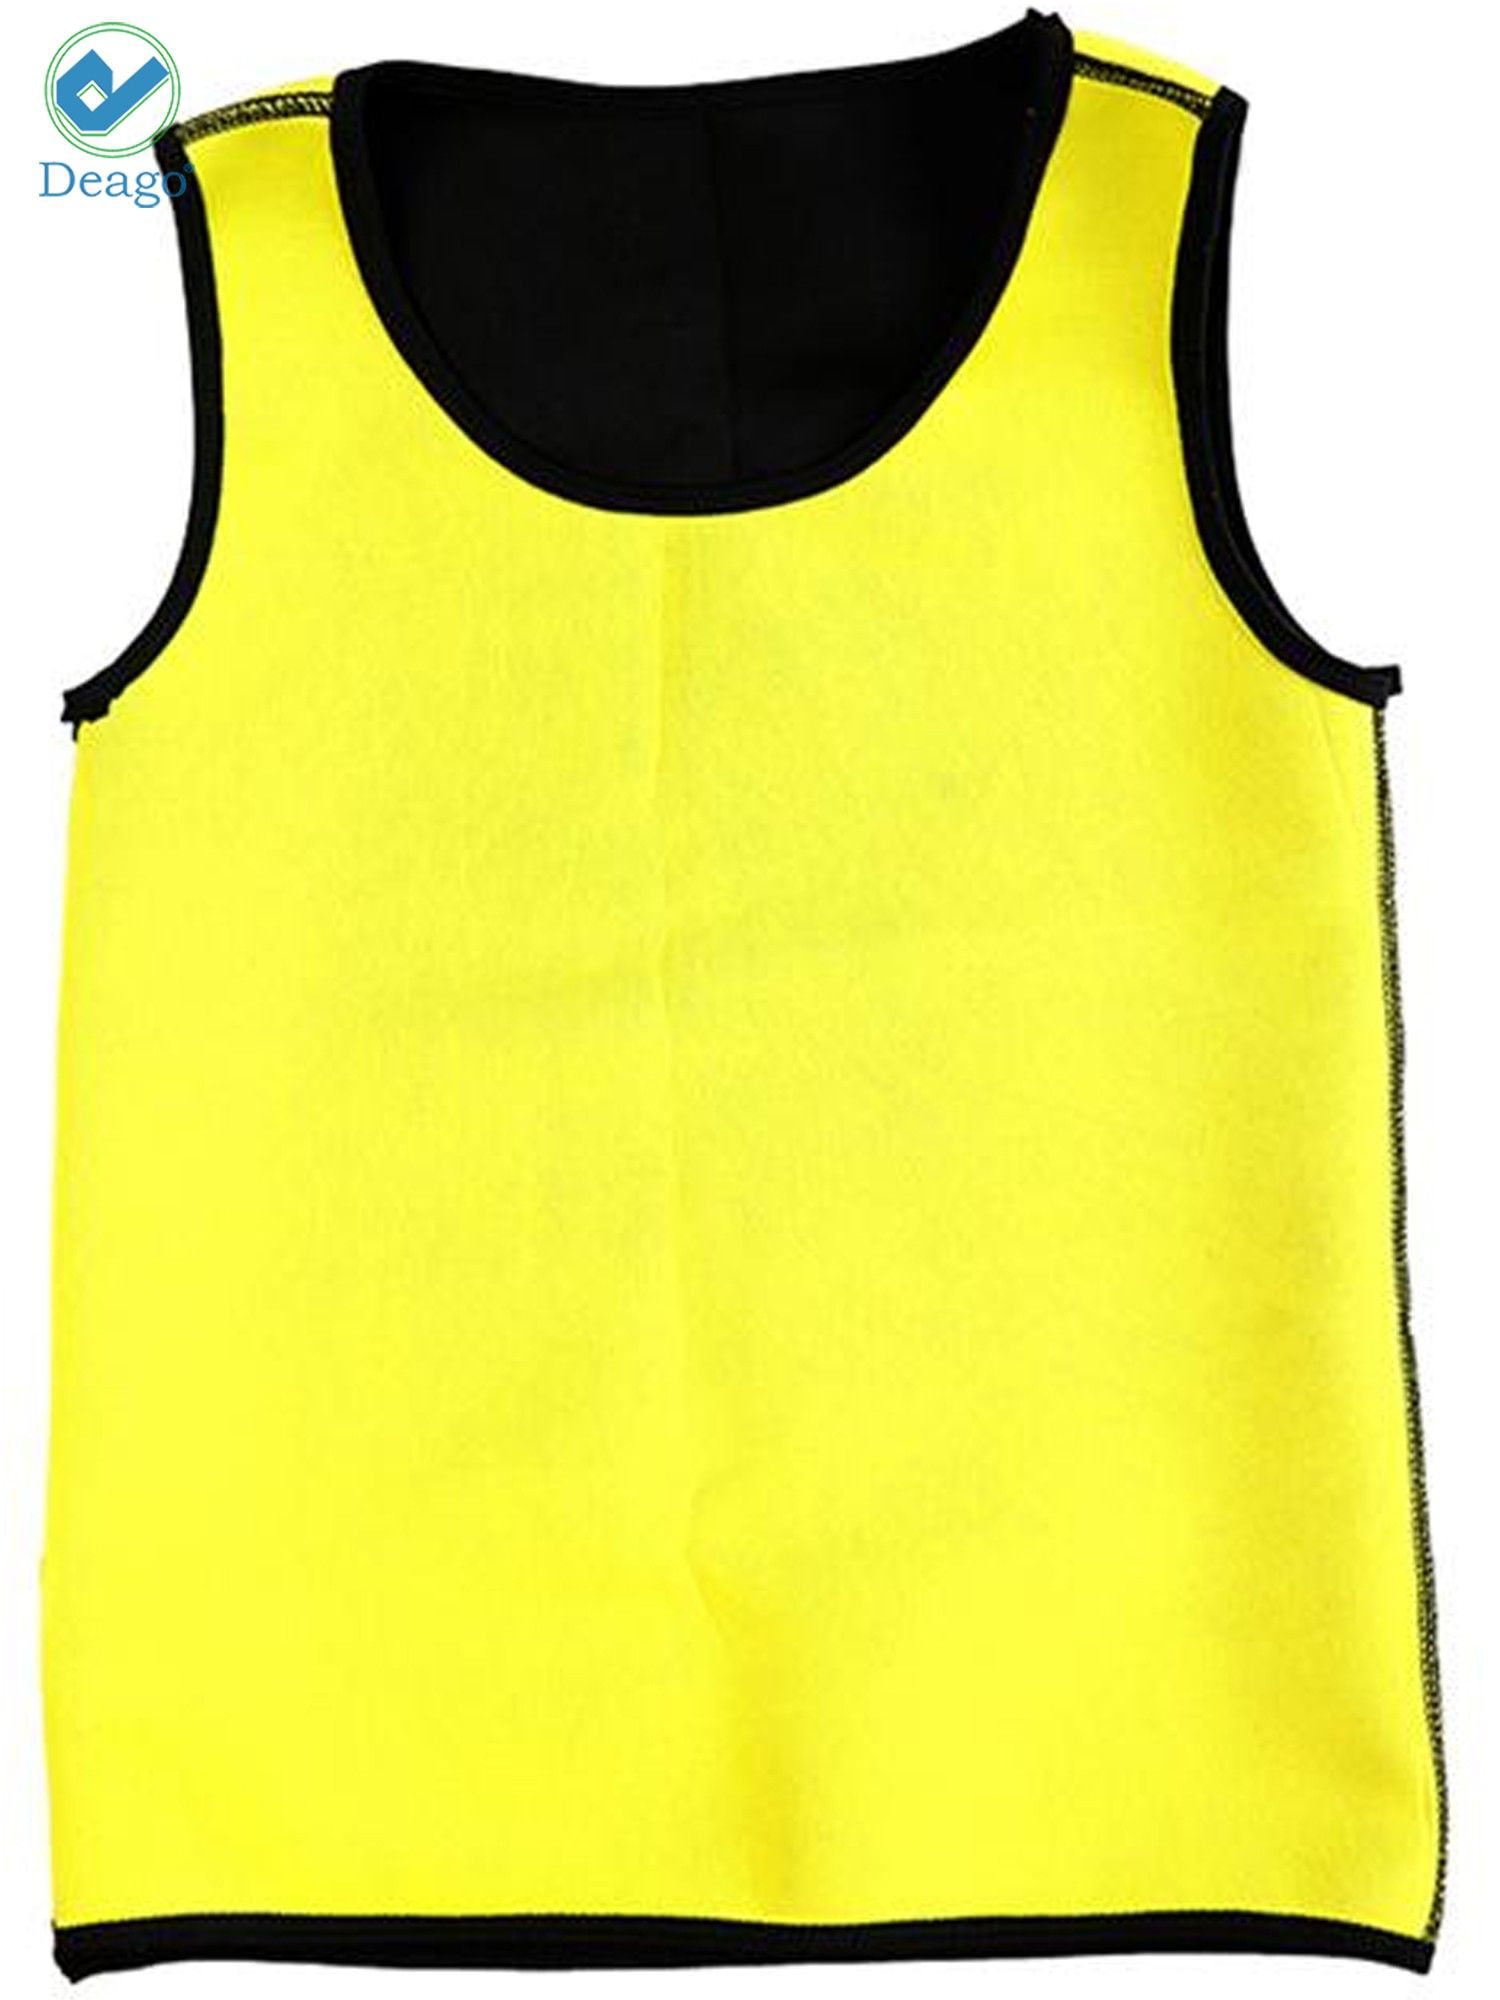 Deago Mens Hot Thermo Body Shaper T Shirt Slimming Neoprene Vest Workout  Sweat Sauna Suit Stomach Fat Burner Weight Loss Tank Top 